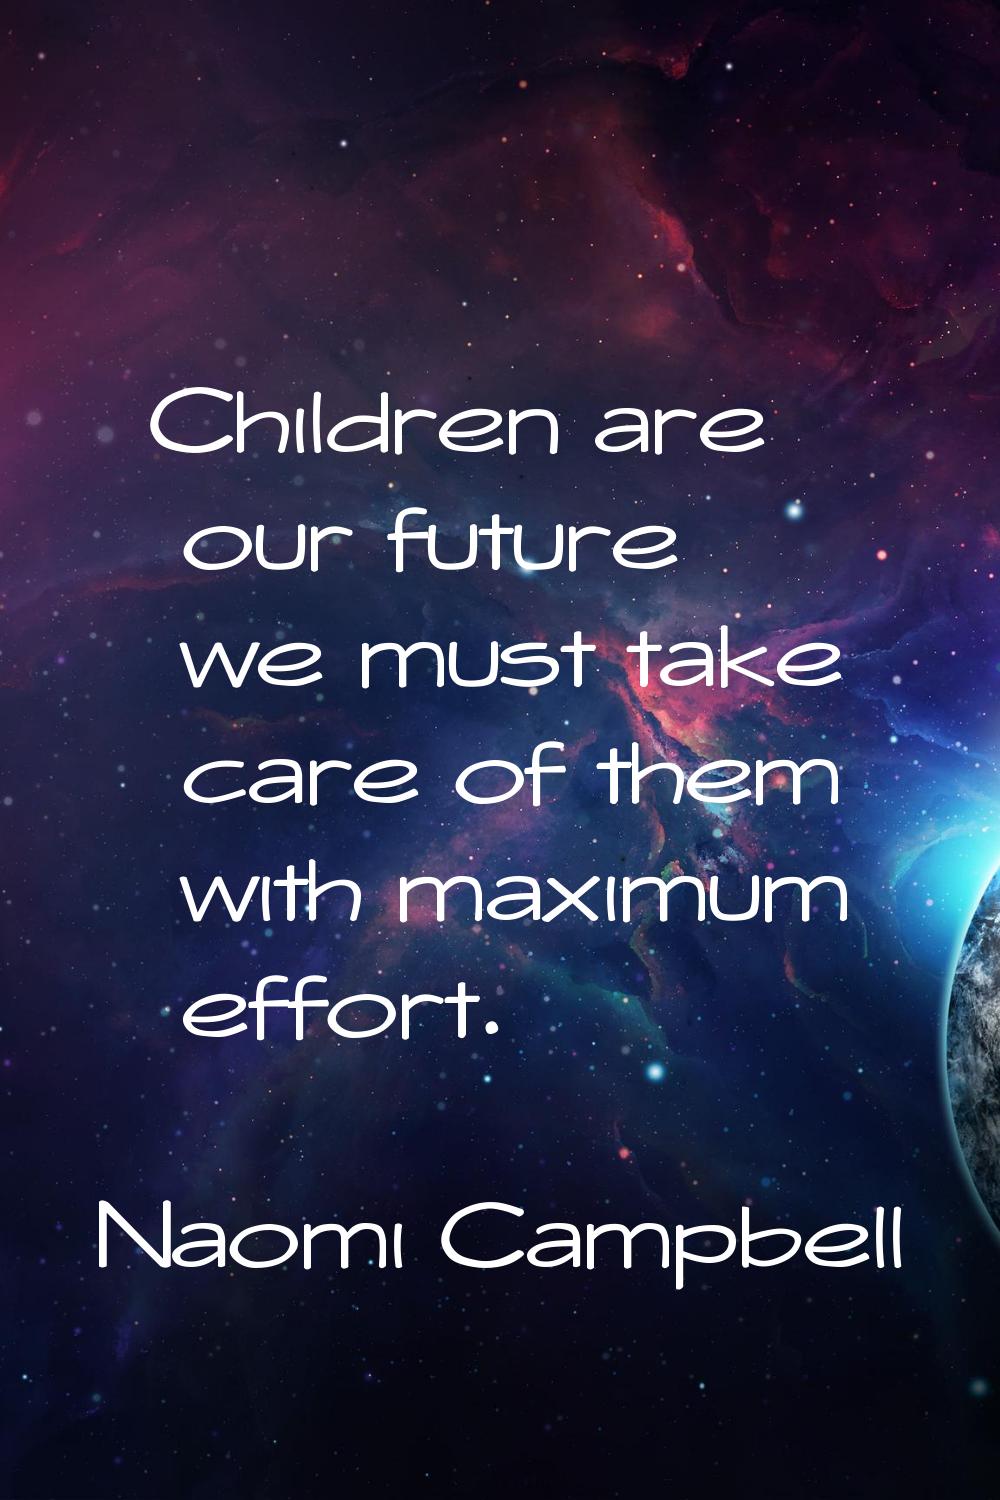 Children are our future we must take care of them with maximum effort.